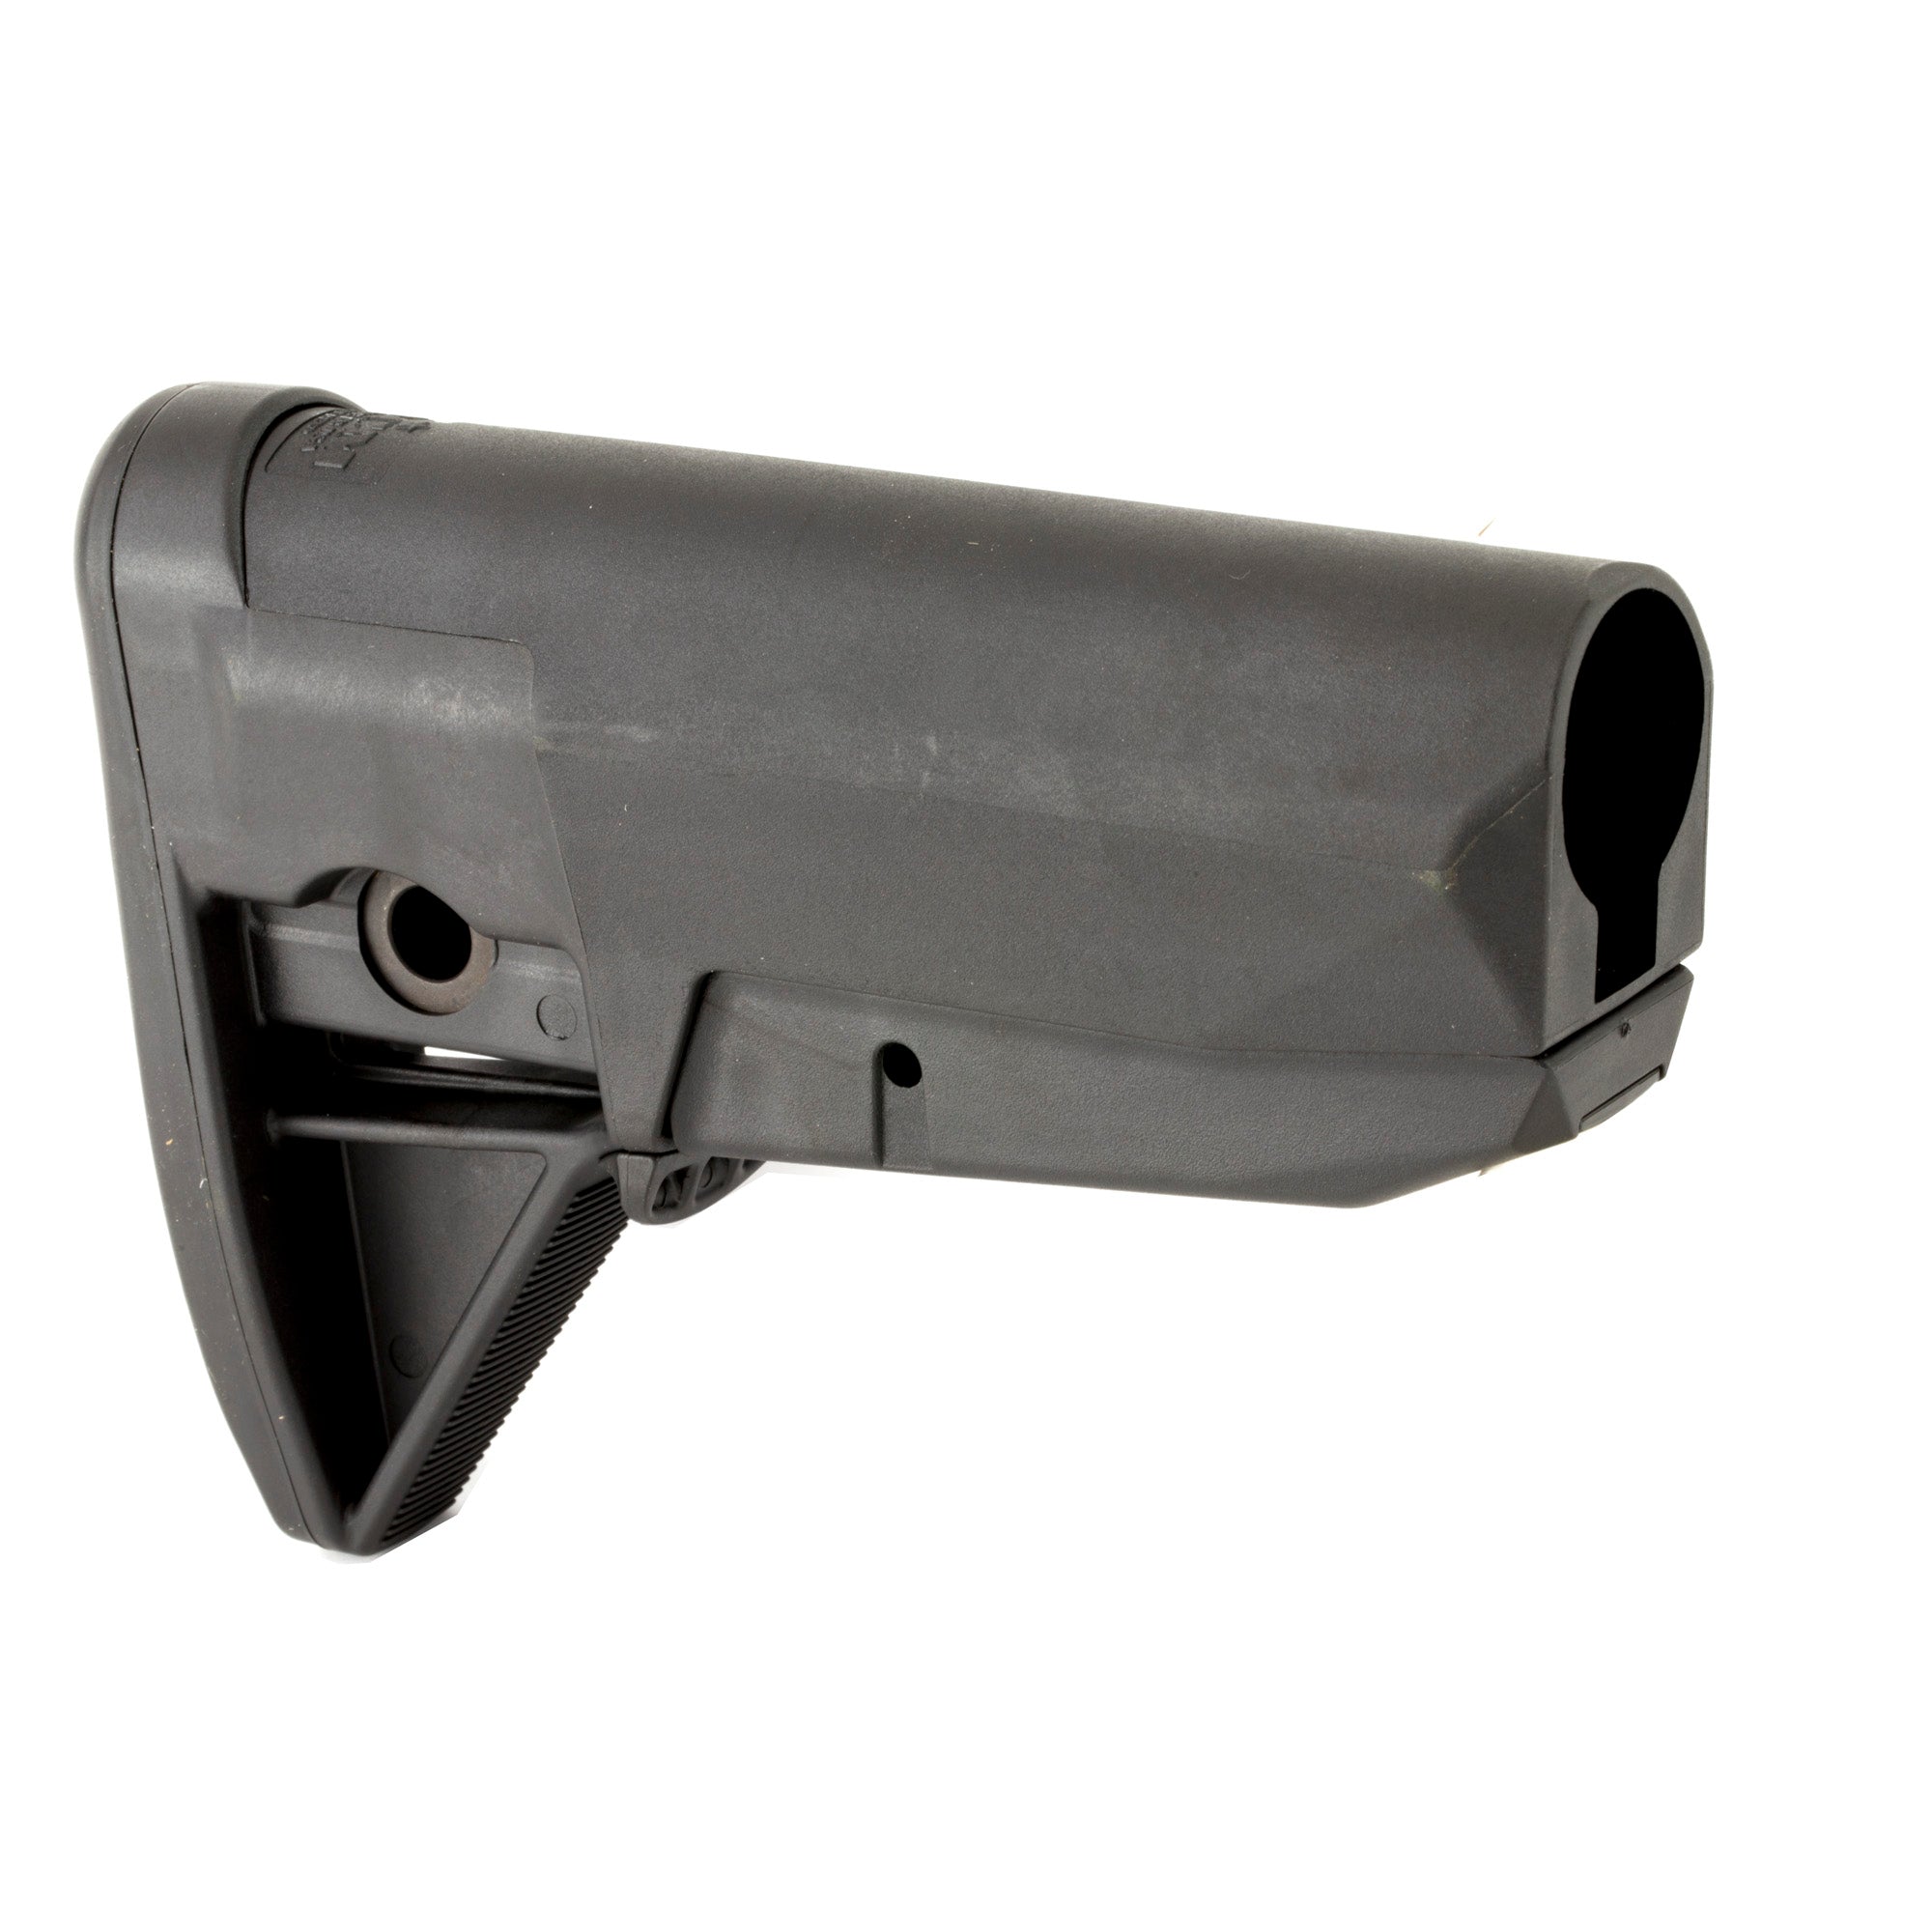 Bravo Company BCMGUNFIGHTER Mod 0 Adjustable Stock designed for mil-spec buffer tubes, featuring ambidextrous sling mounts and a non-slip rubber butt pad.